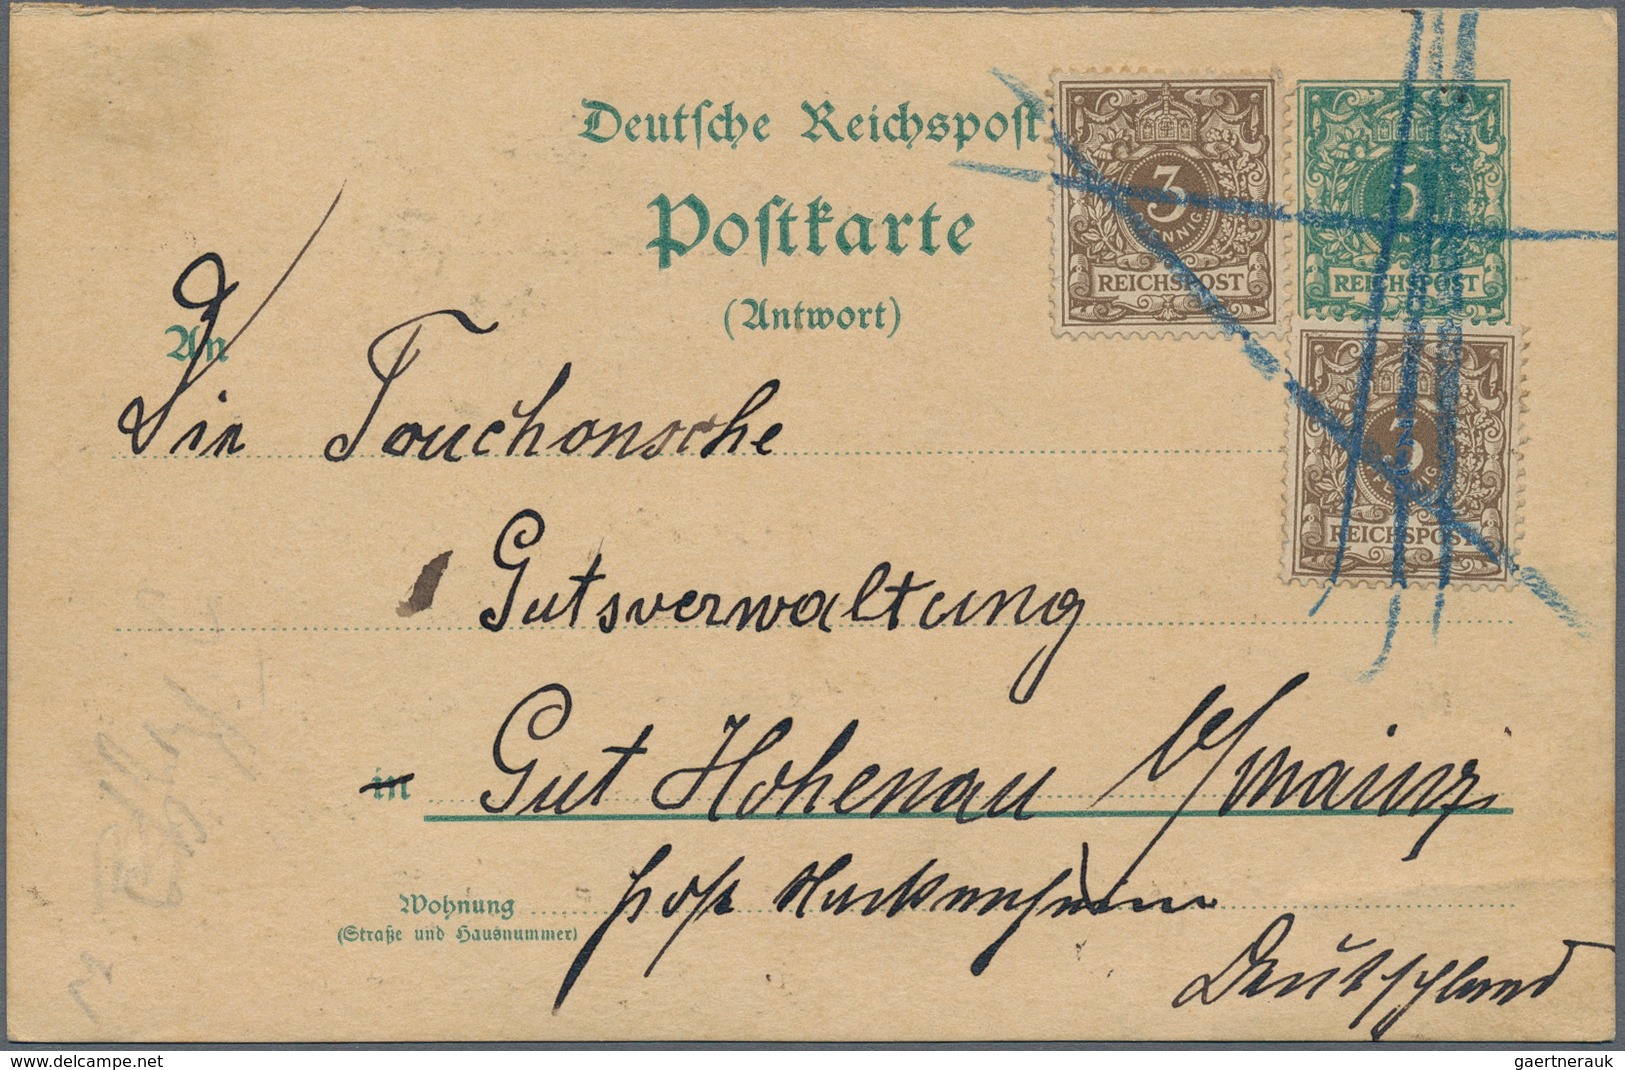 Schweden: 1840's-1930's ca.: About 60 letters, covers, picture postcards and postal stationery items